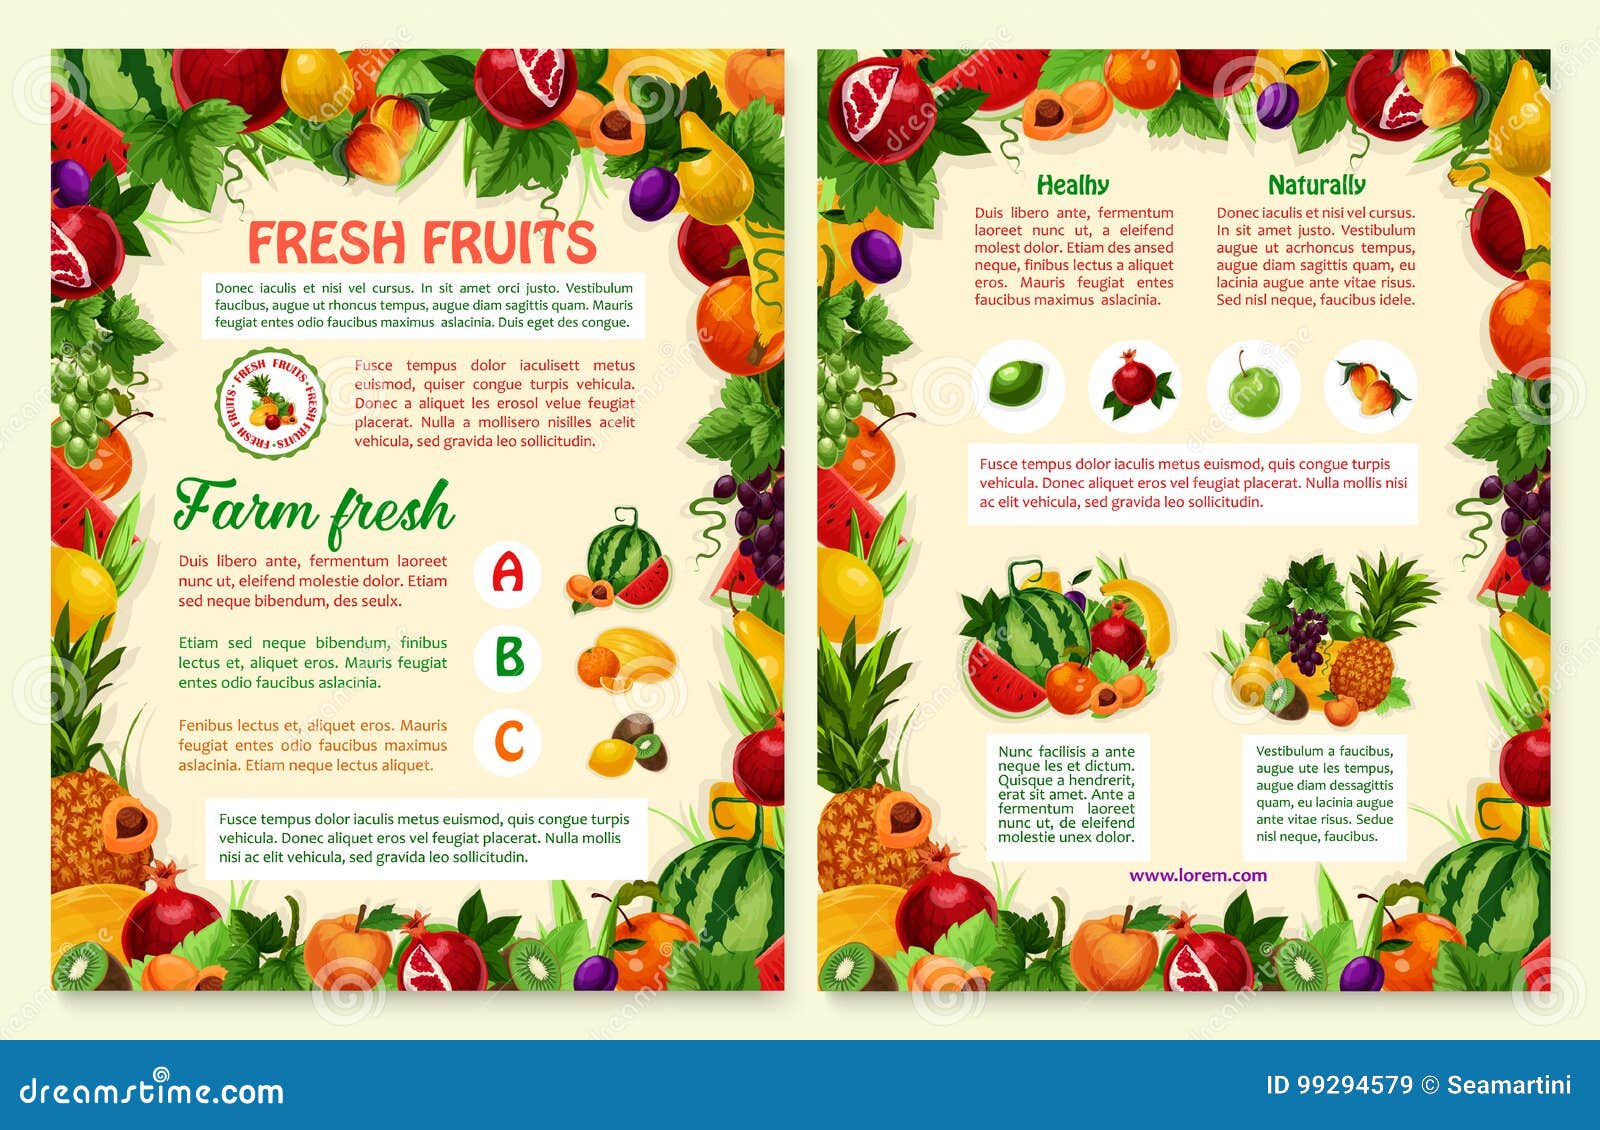 All 3 Limited Edition Summer Fruit PDF Downloads!